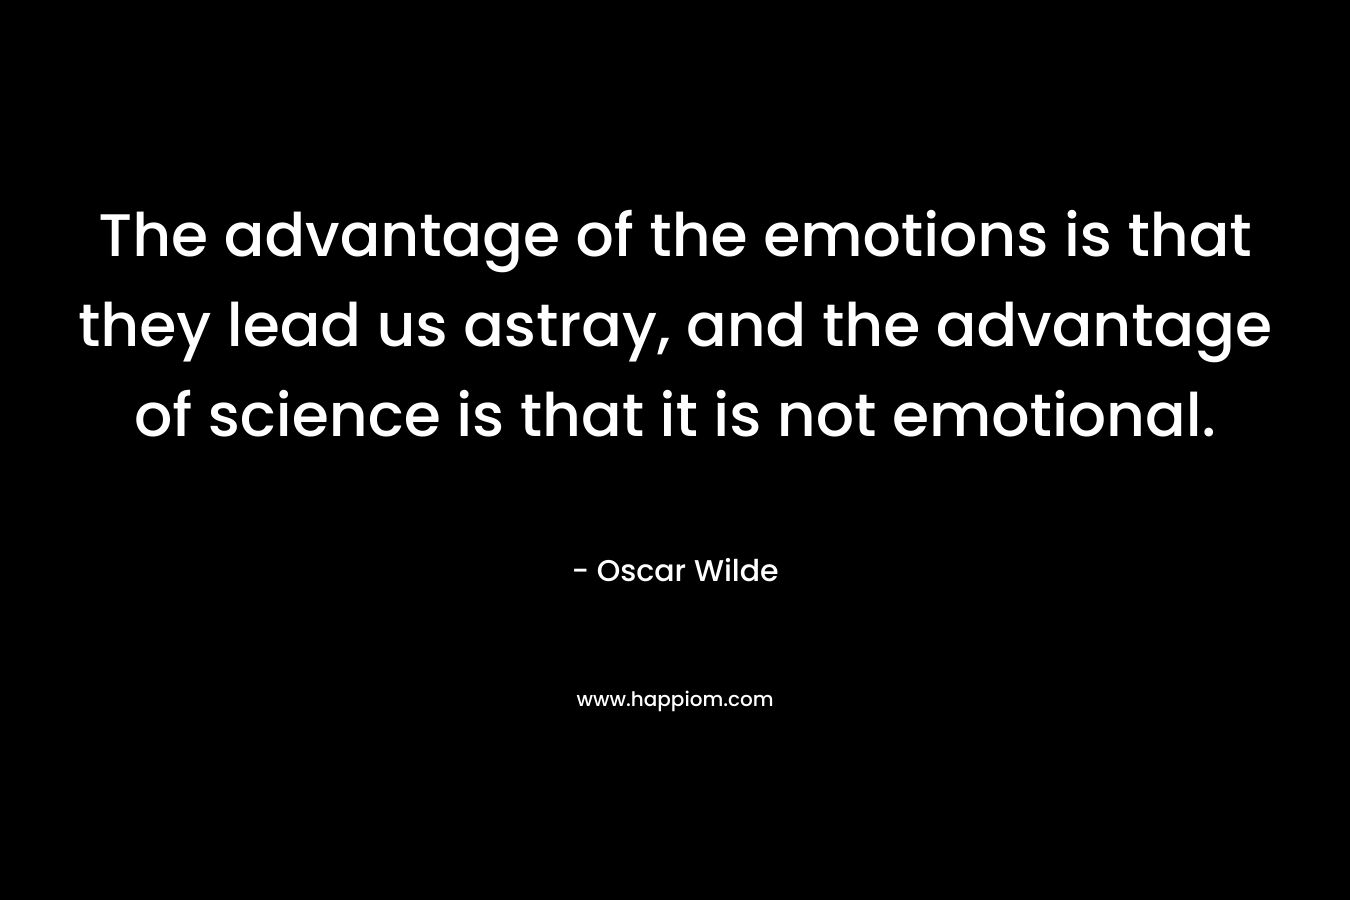 The advantage of the emotions is that they lead us astray, and the advantage of science is that it is not emotional. – Oscar Wilde